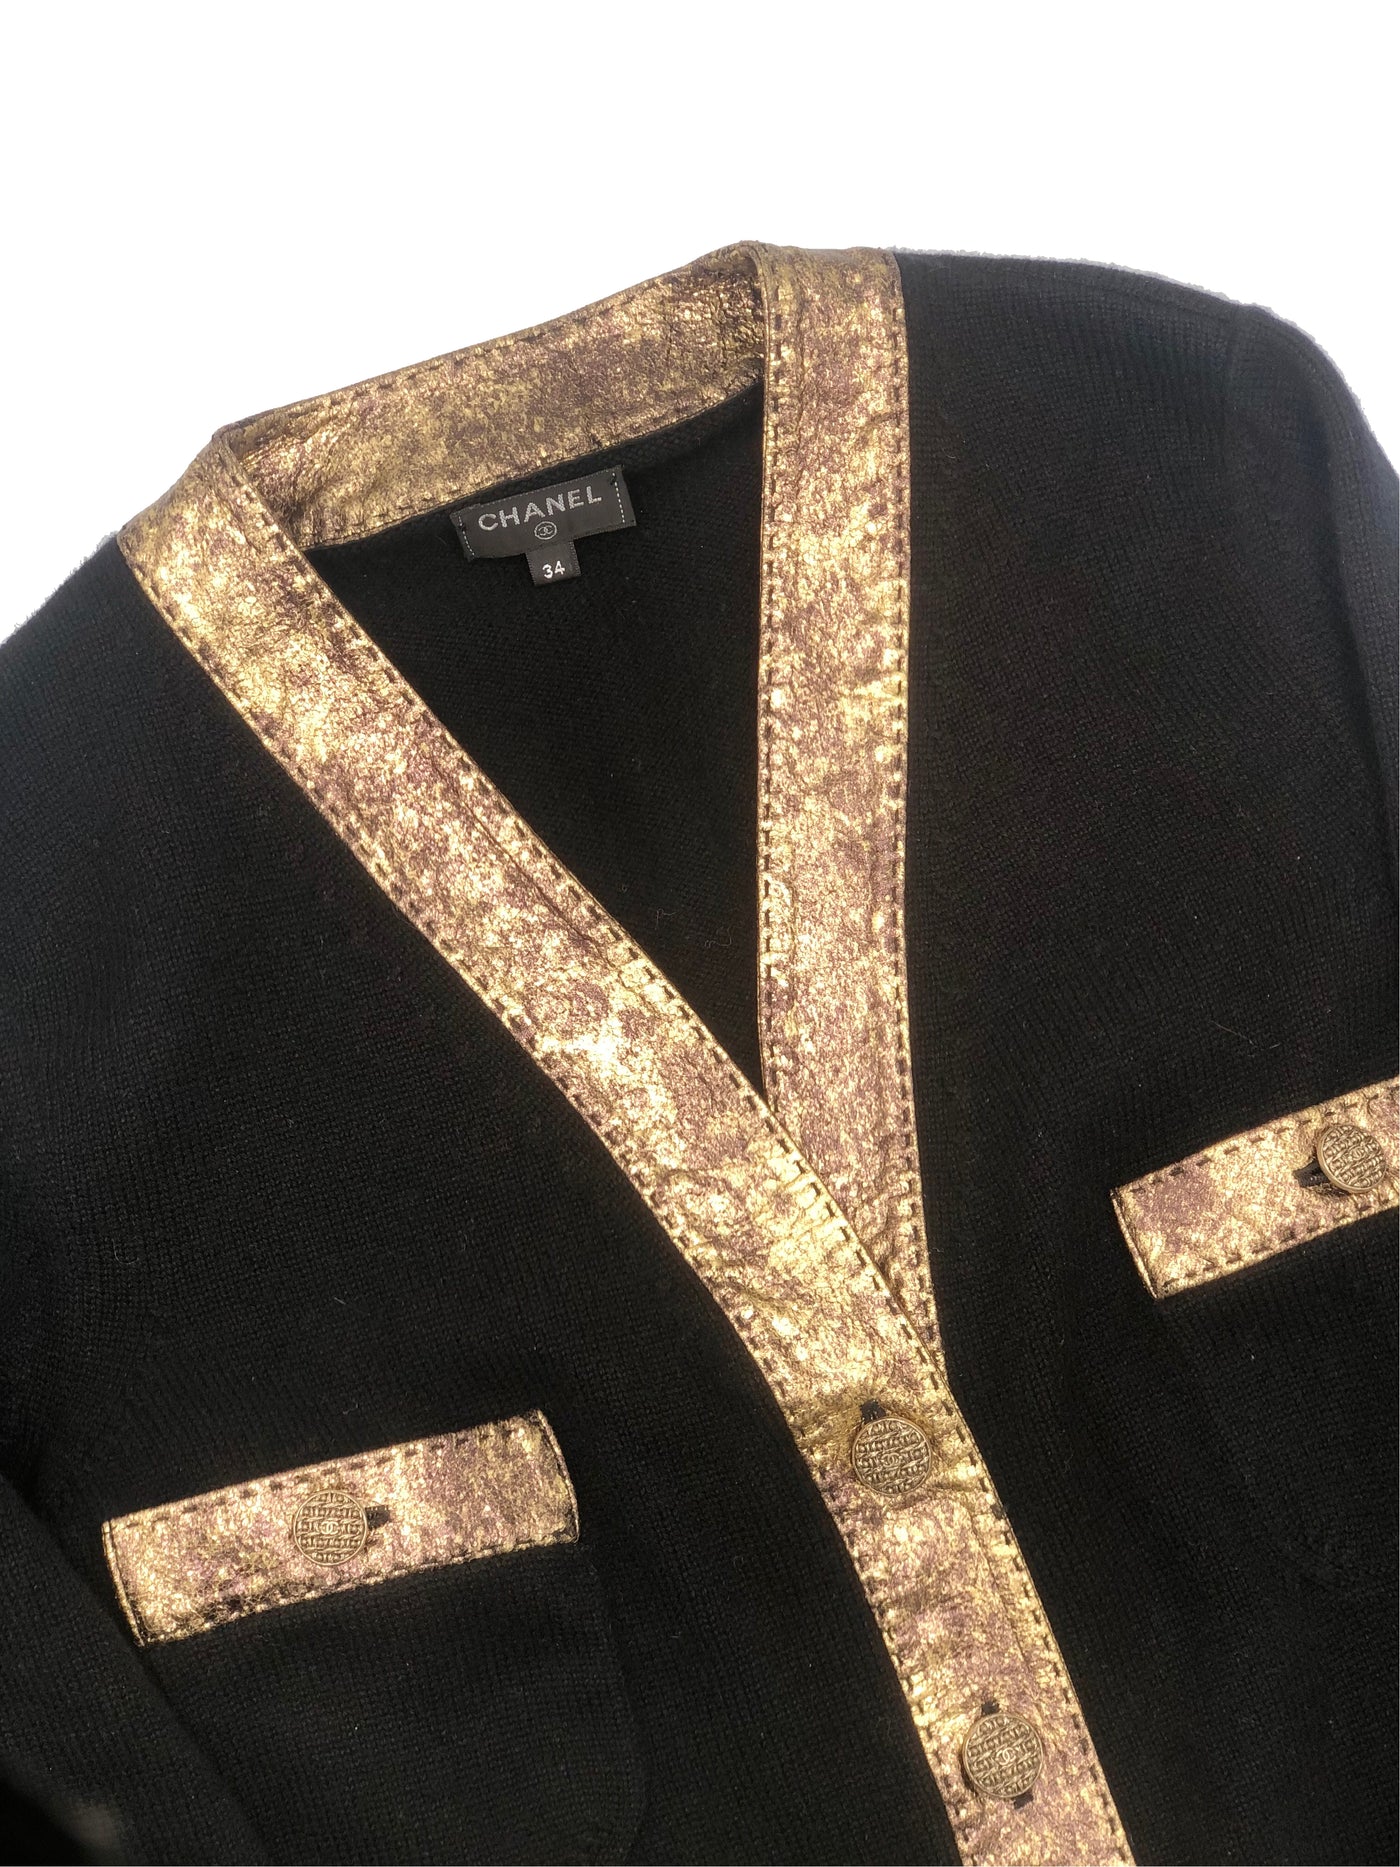 CHANEL Cashmere Cardigan Jacket with gold trim size 34